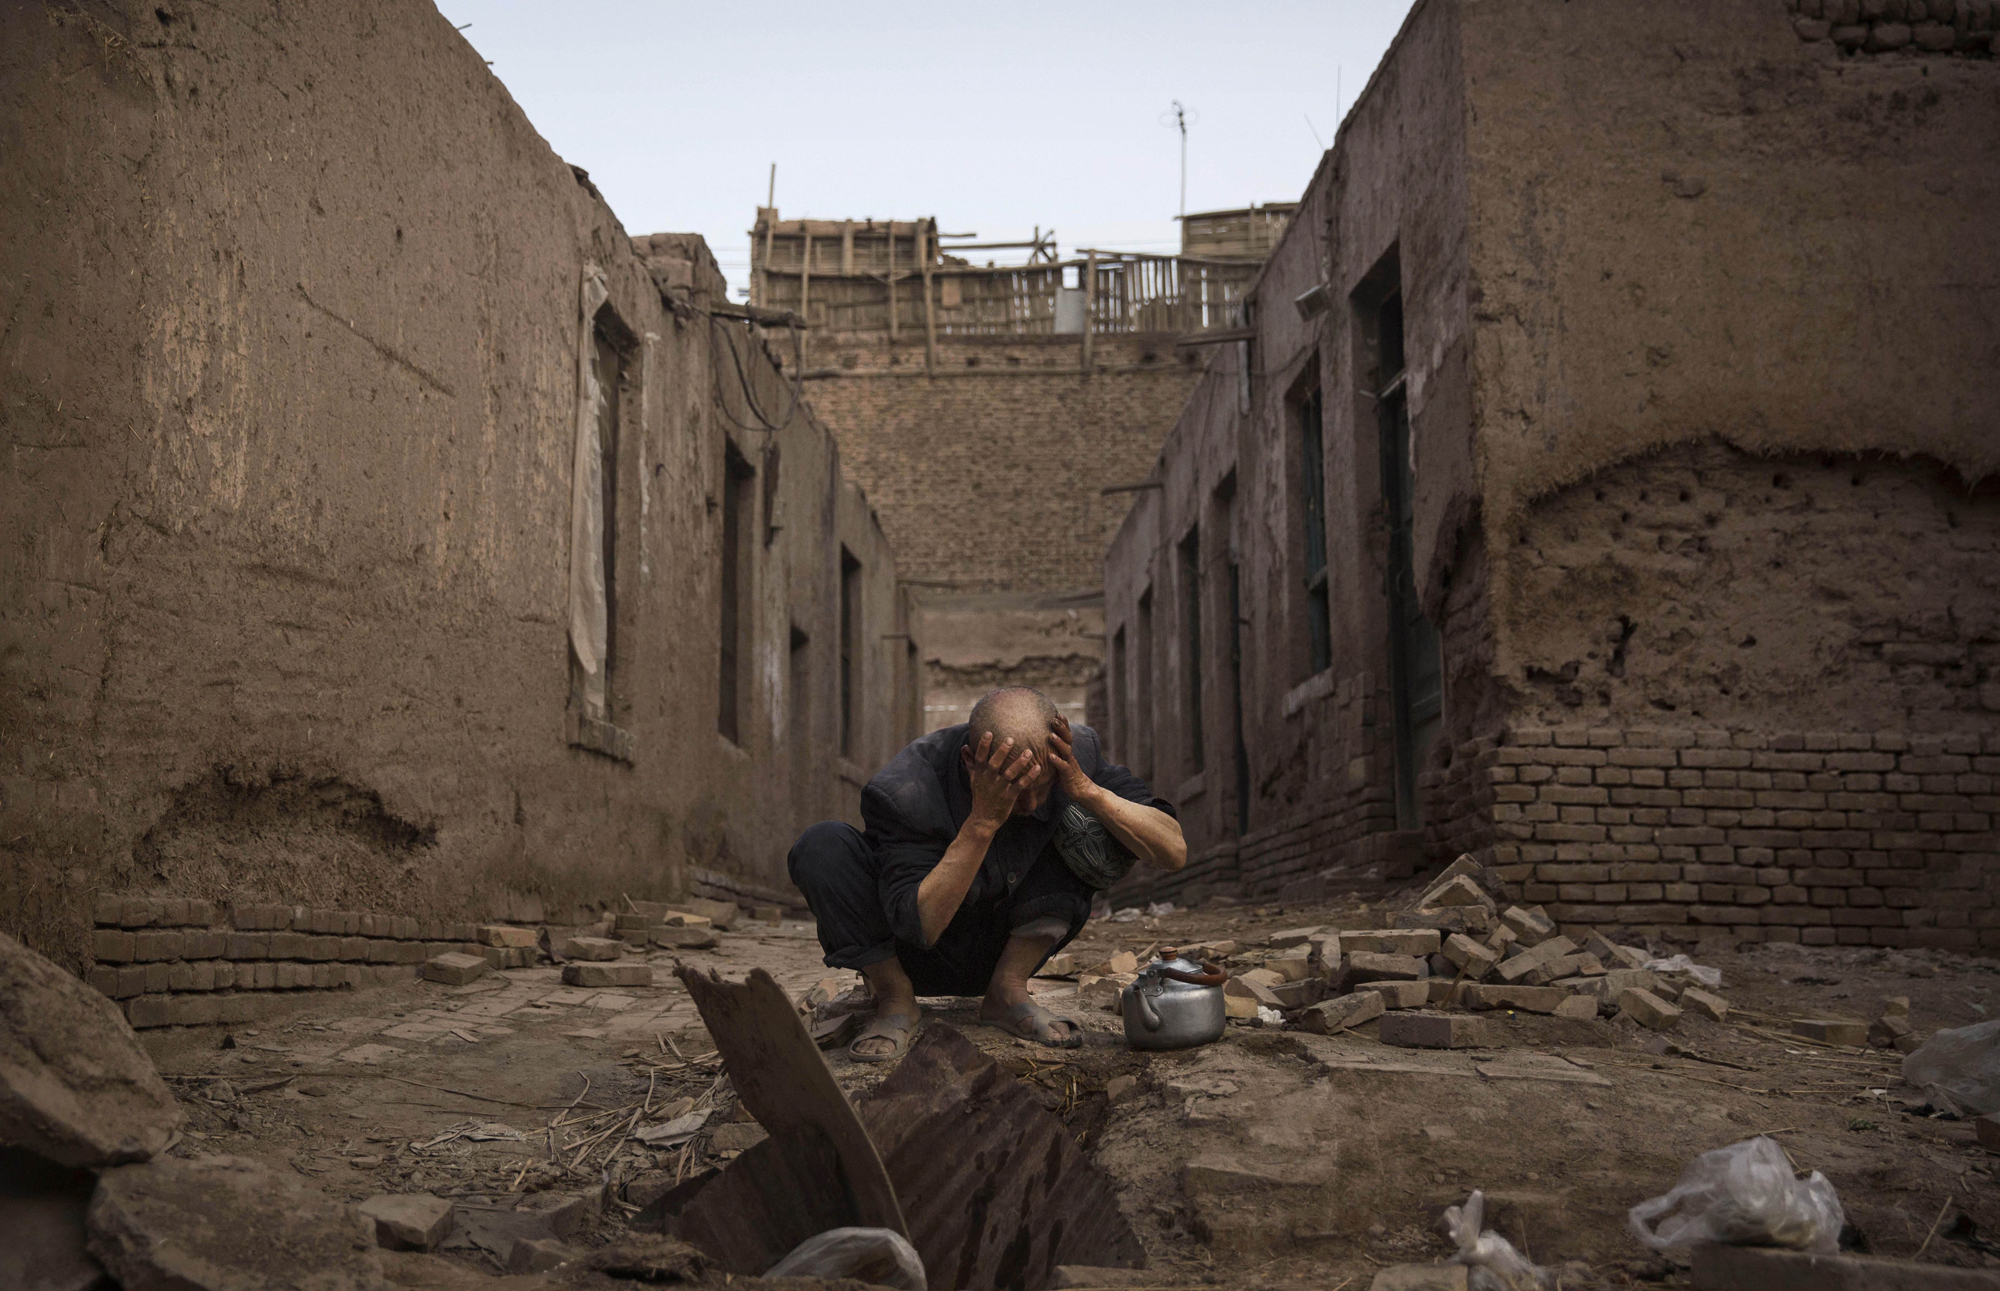 A Uyghur man washes himself before prayers next to abandoned traditional houses set to be demolished by authorities to make way for new homes on July 27, 2014 in old Kashgar.